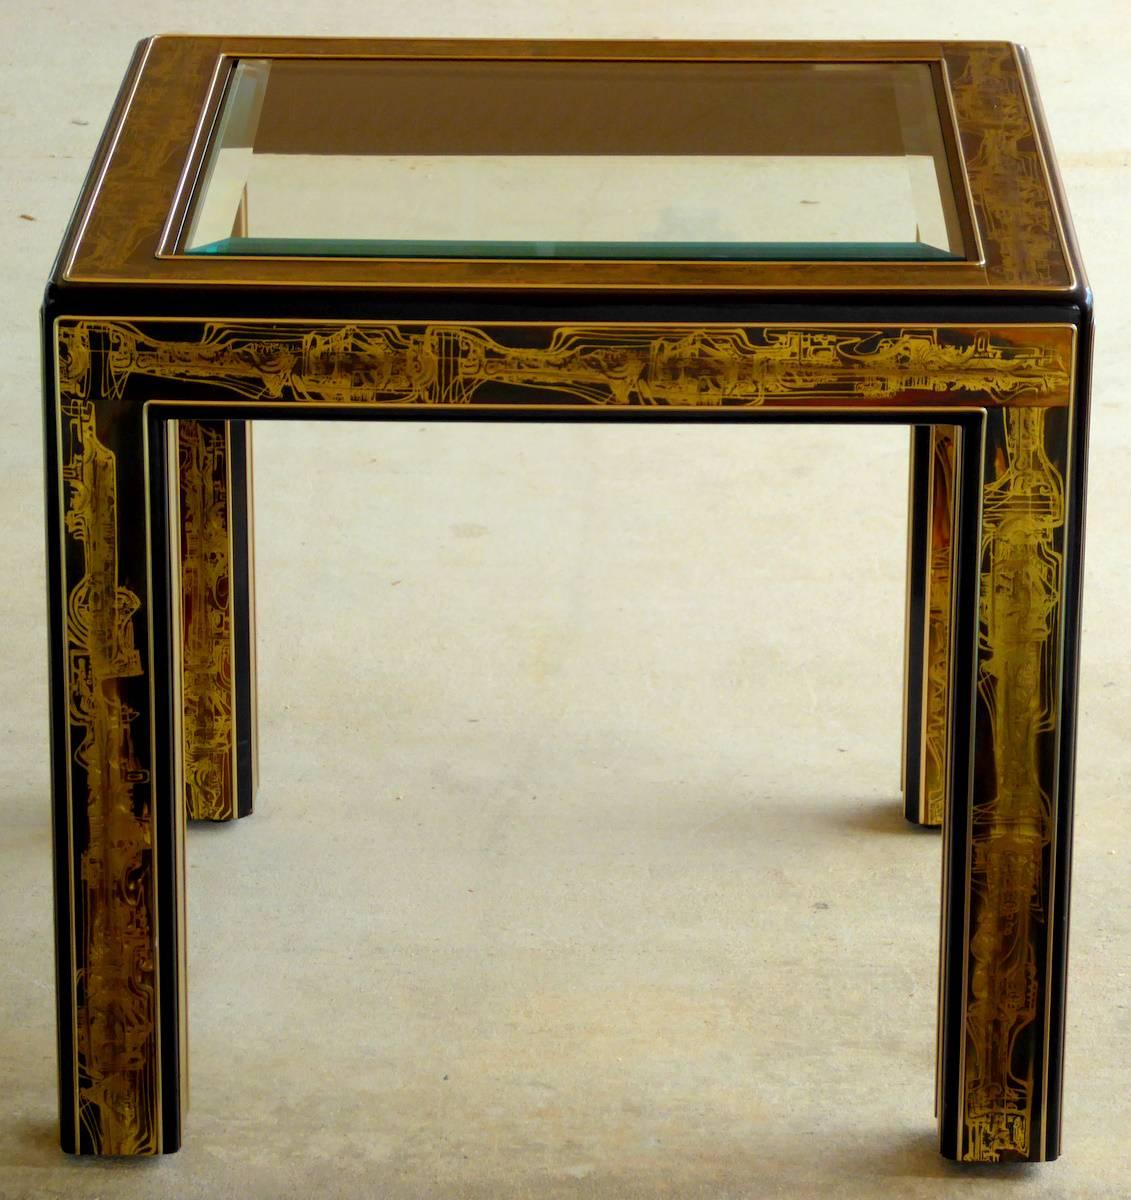 An elegant end table by Bernhard Rohne for Mastercraft. Black lacquered wood with acid etched brass chinoiserie decoration and inset beveled glass top.

Although cocktail tables can be found, we rarely see the end tables.

(Please note: We try